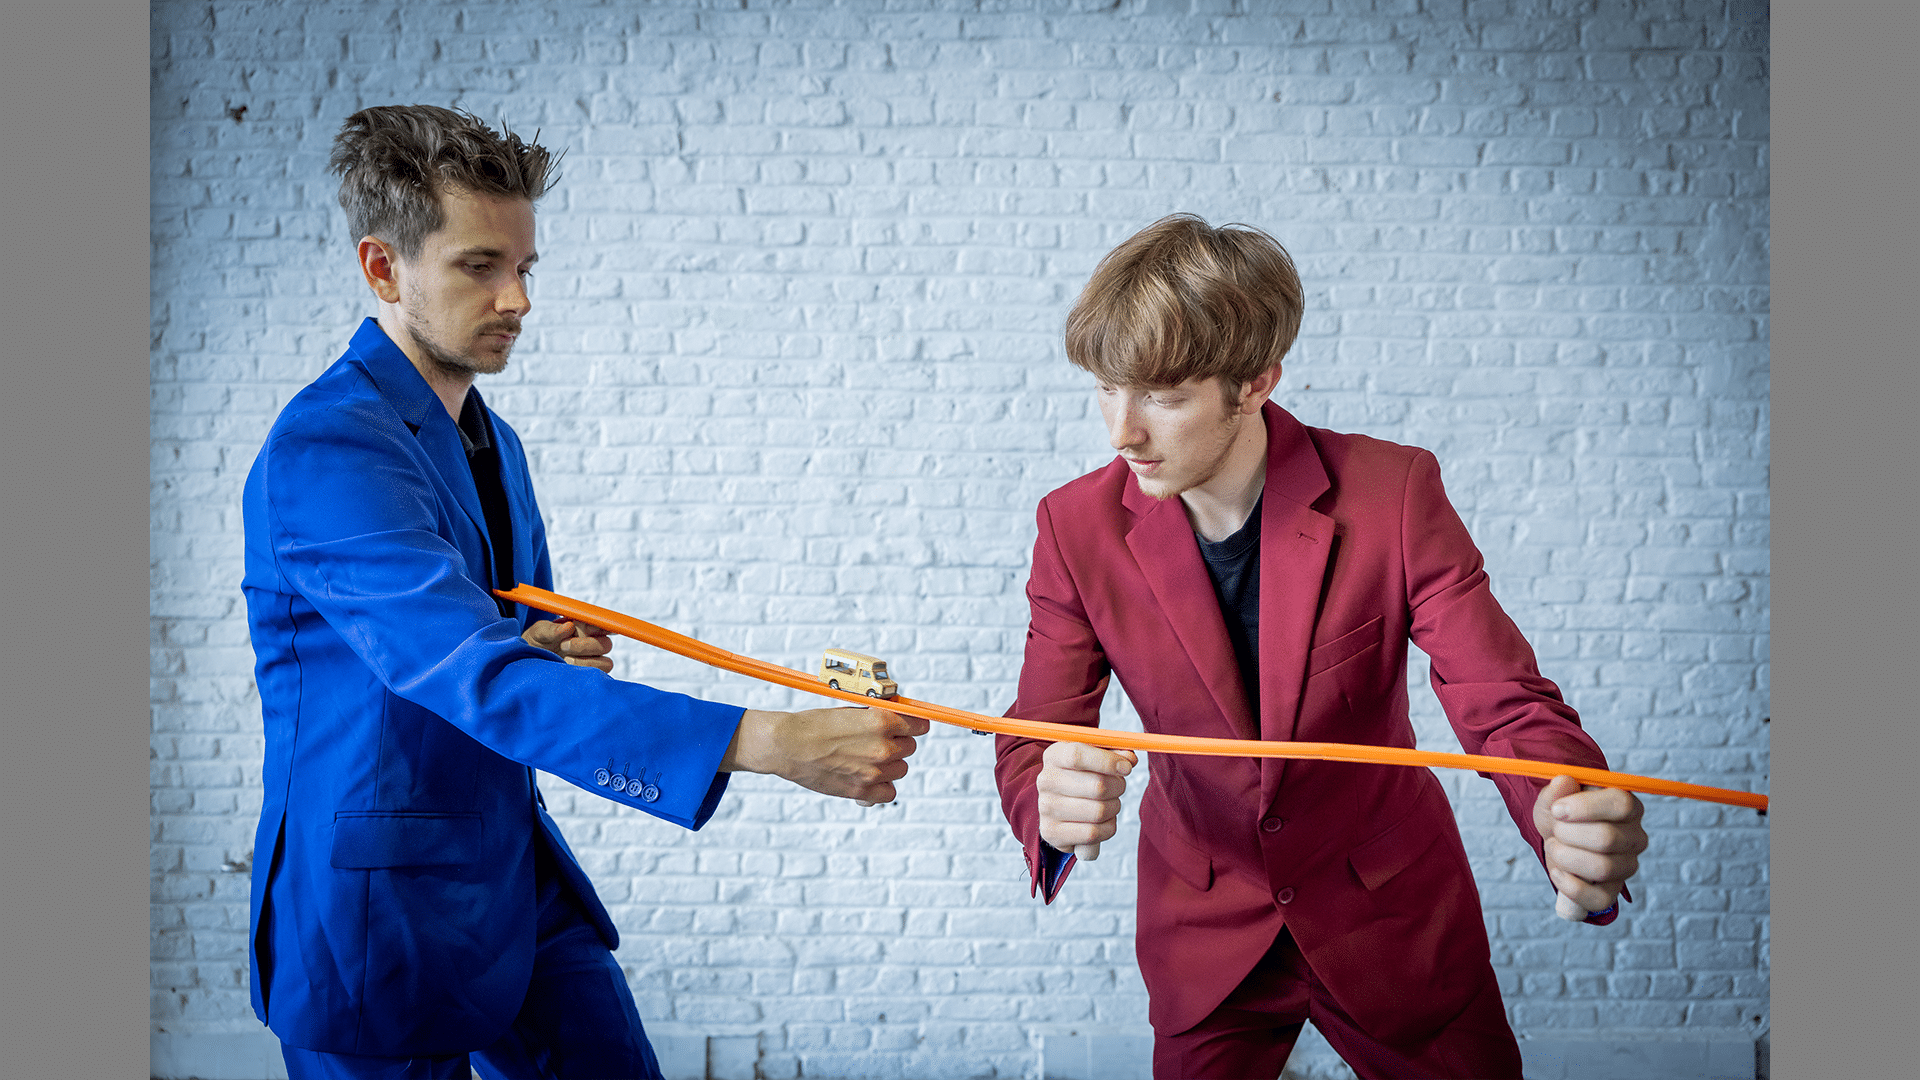 Two performers wearing red and blue suits balance a toy car track on their hands, a yellow toy bus rolls along it.